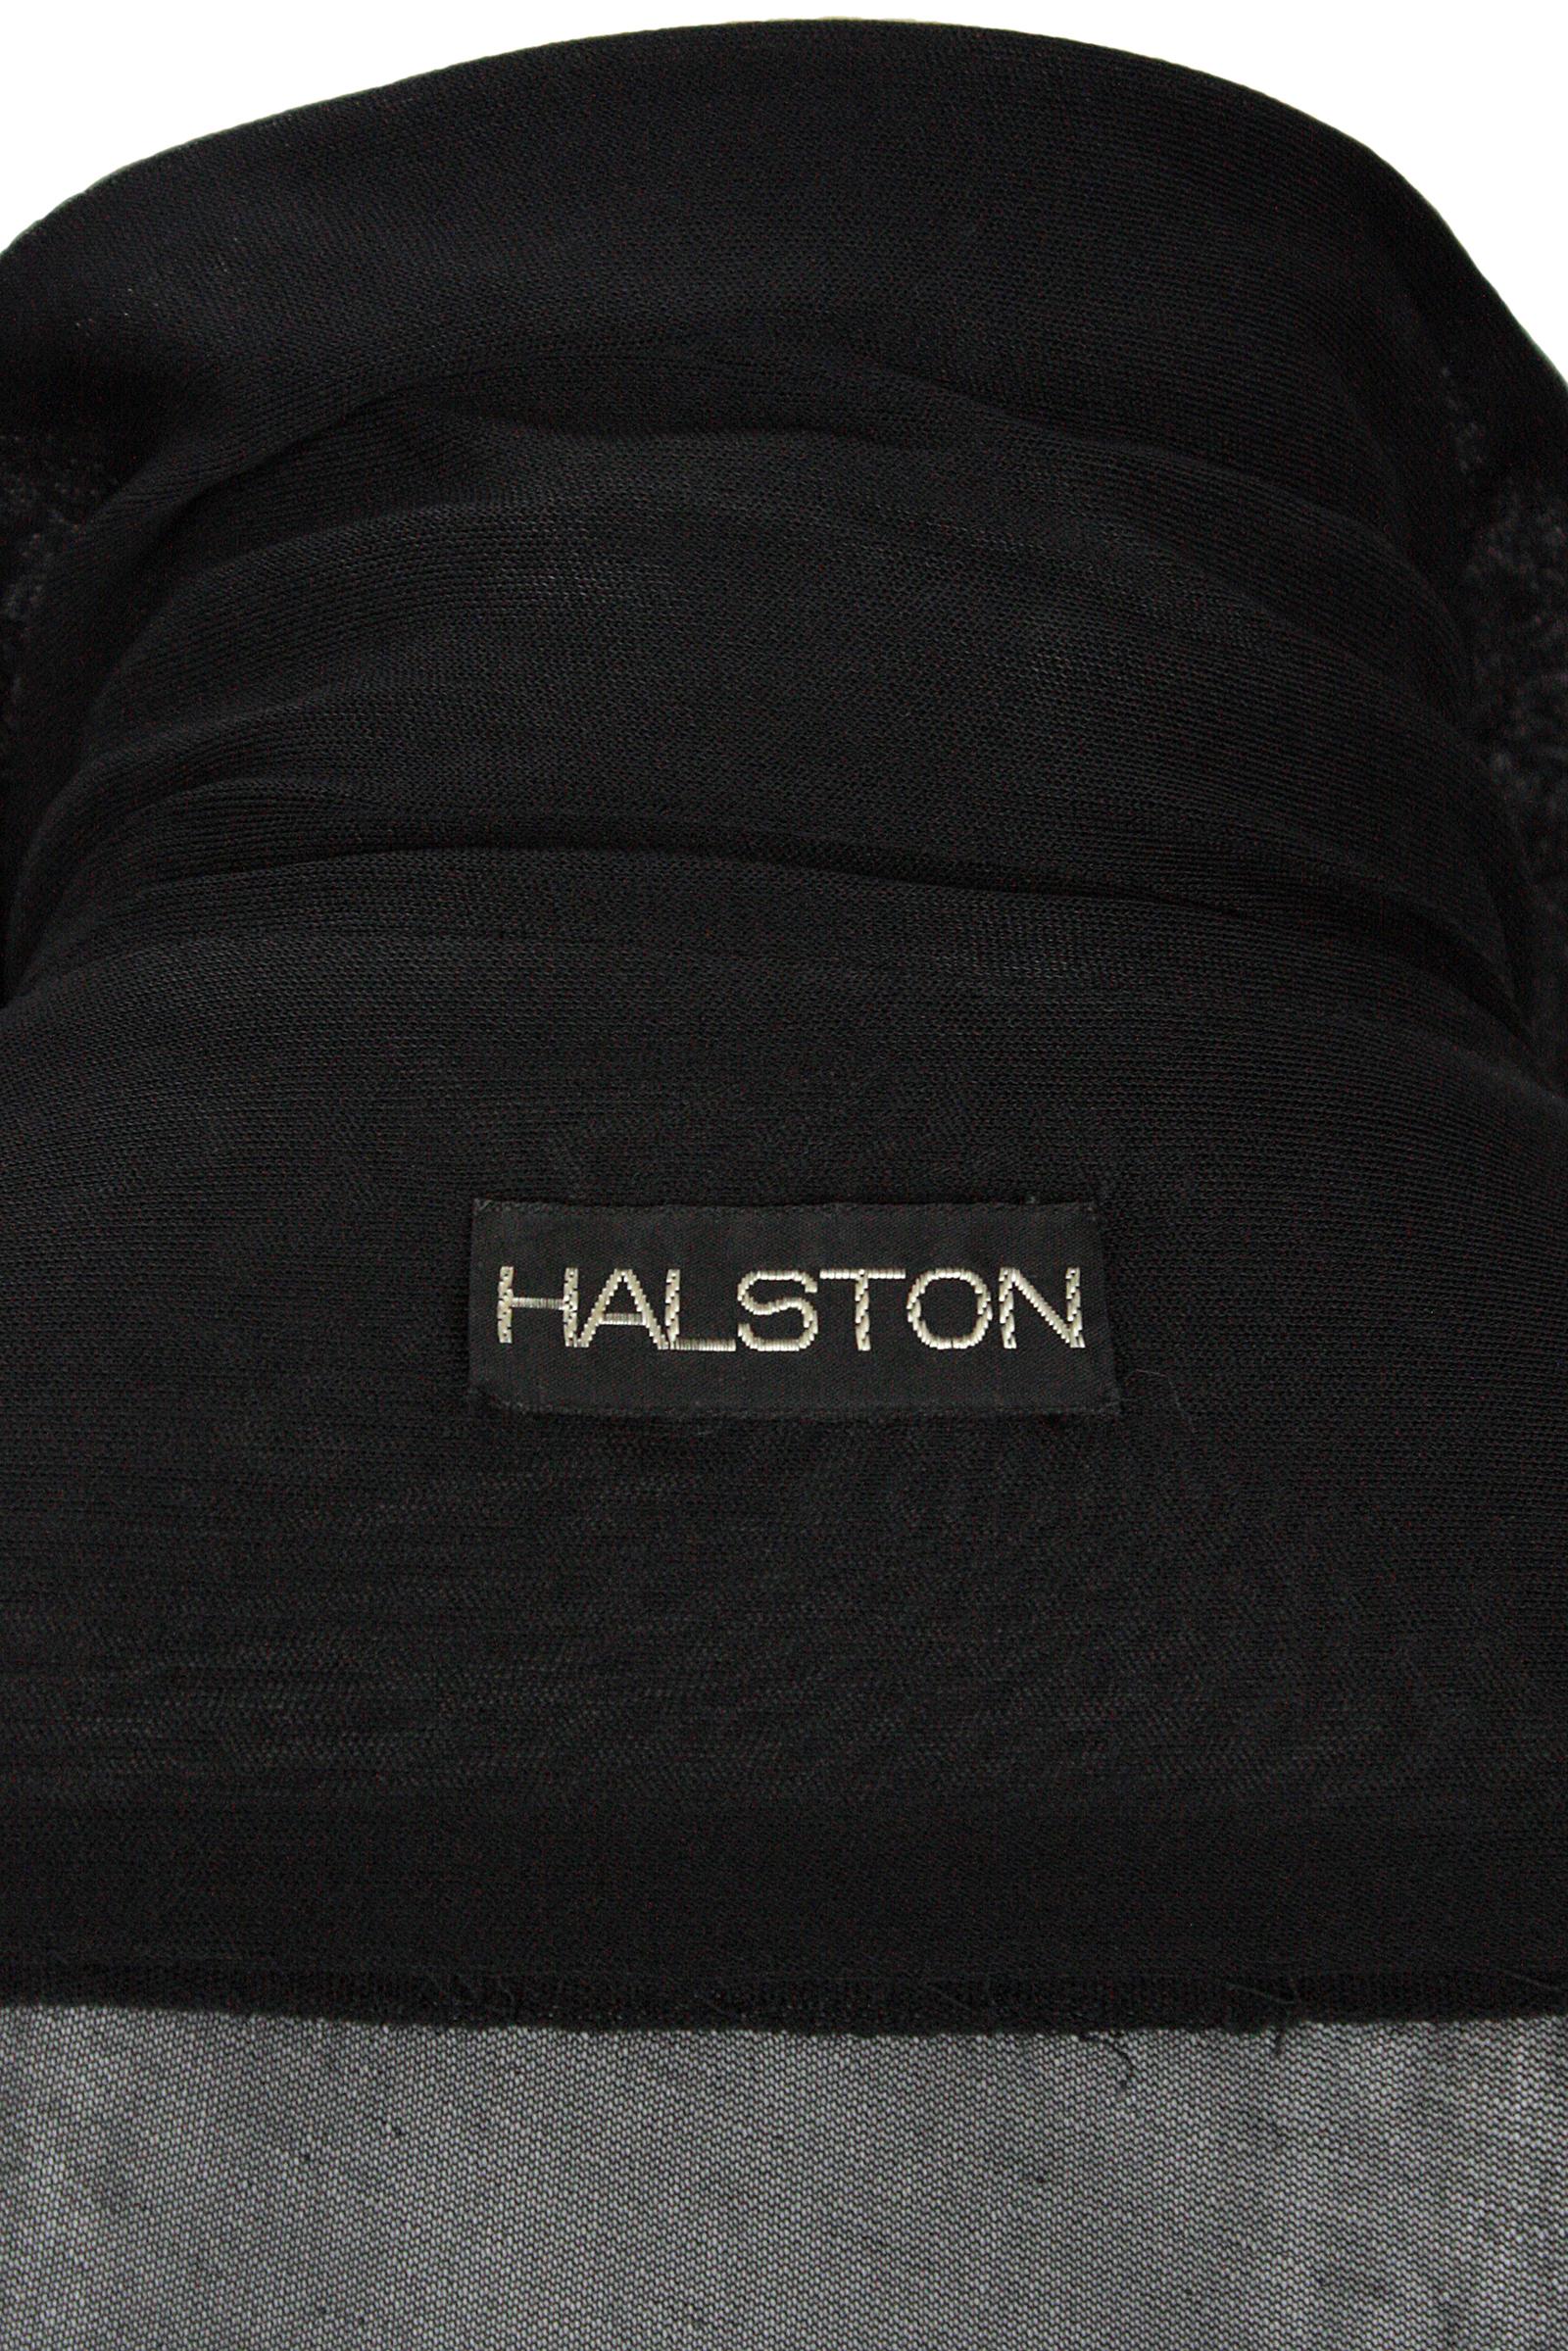 1970s Halston Black Sheer Jersey Button Down Shirt In Good Condition In Los Angeles, CA